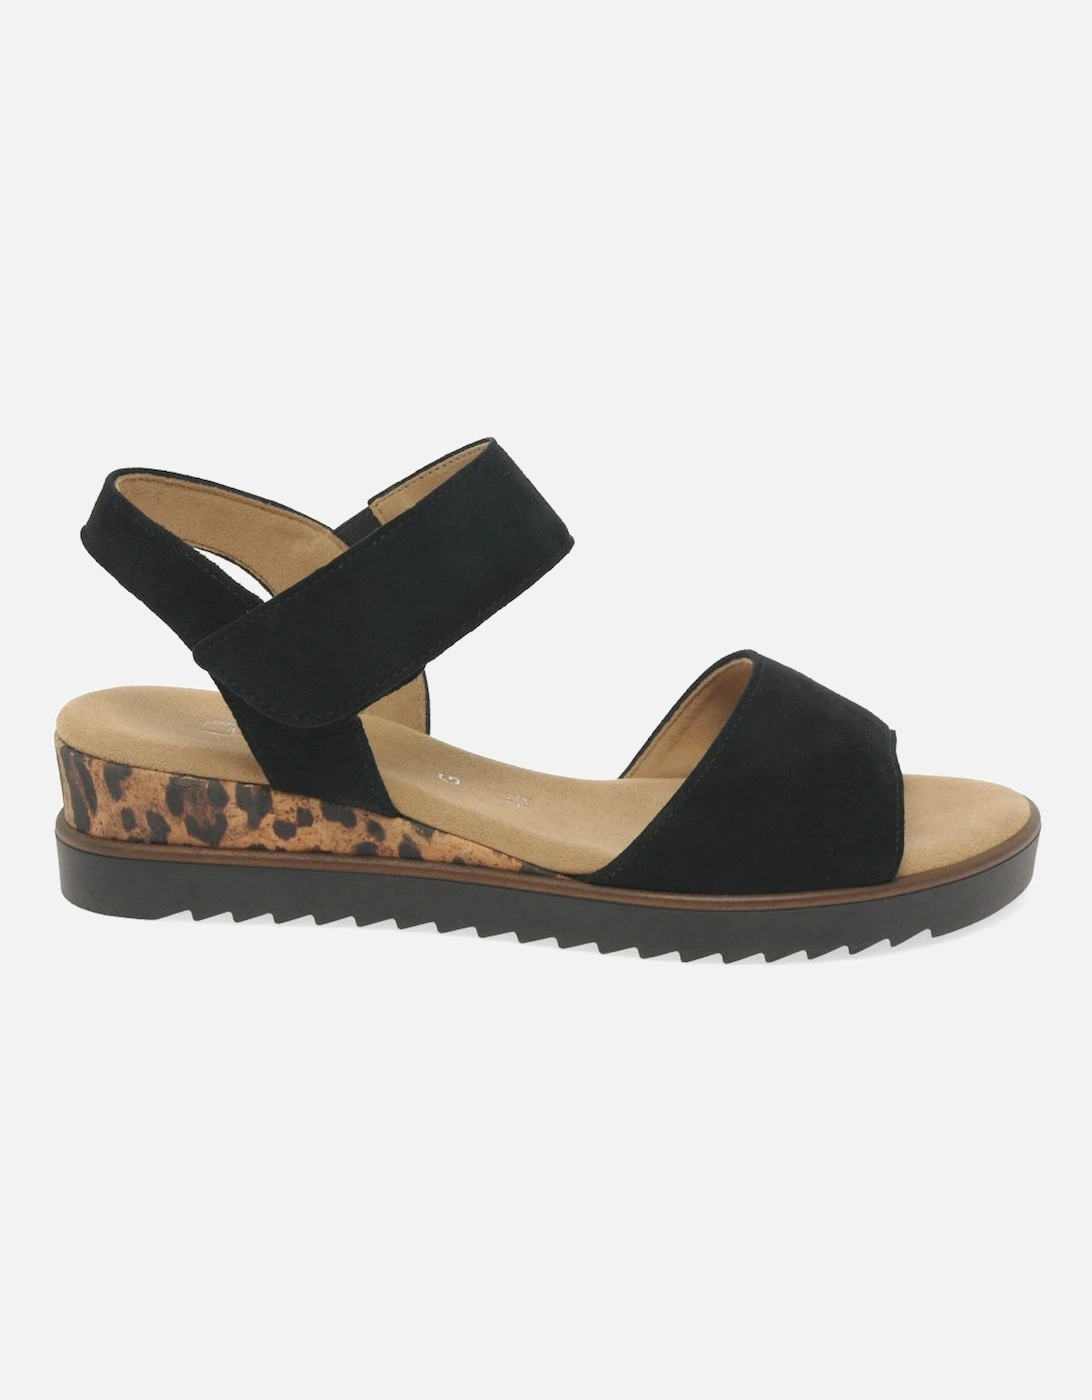 Raynor Womens Sandals